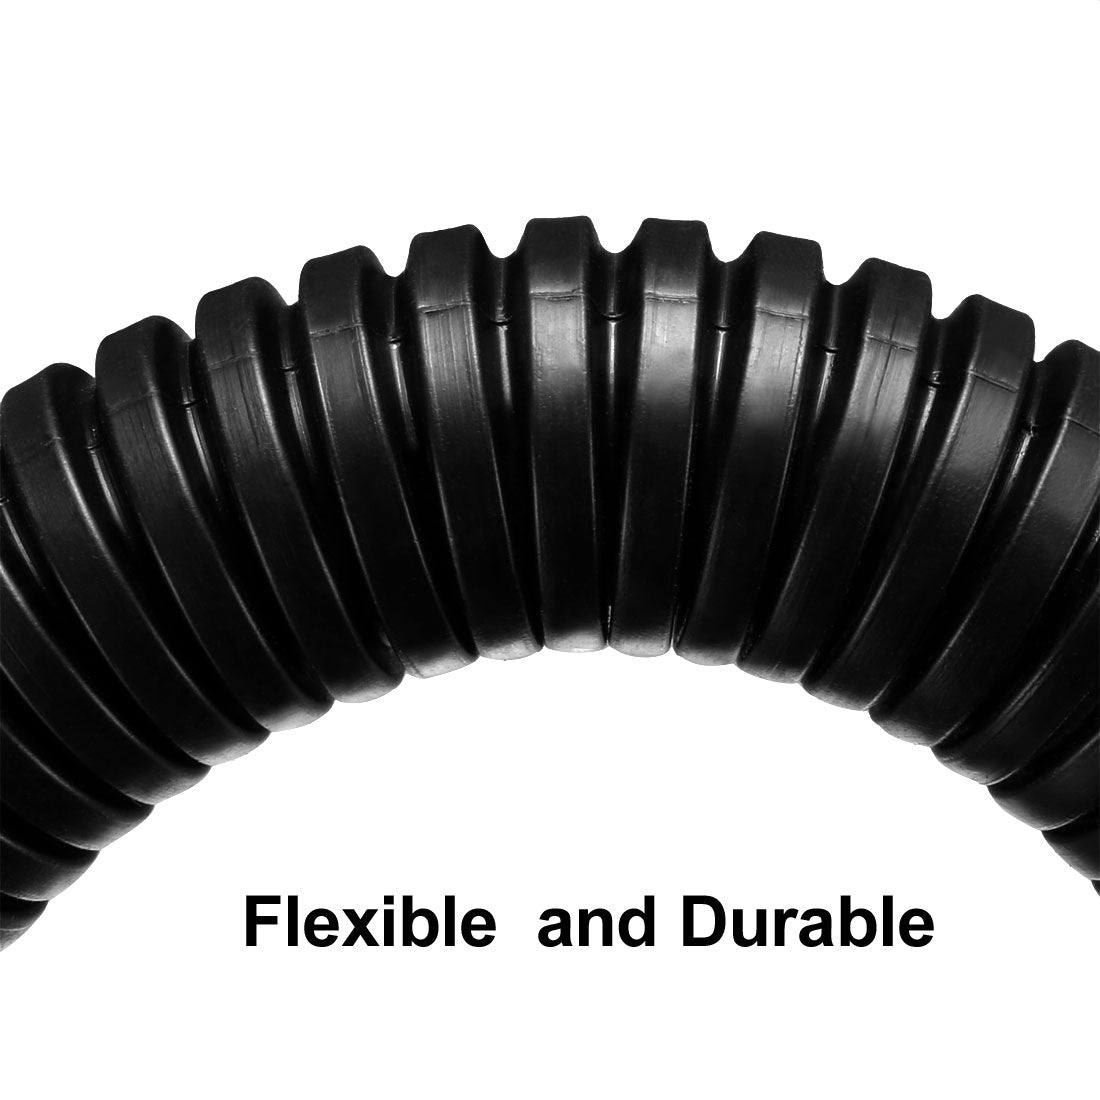 uxcell Uxcell 12 M 16 x 20 mm PP Flexible Corrugated Conduit Tube for Garden,Office Black